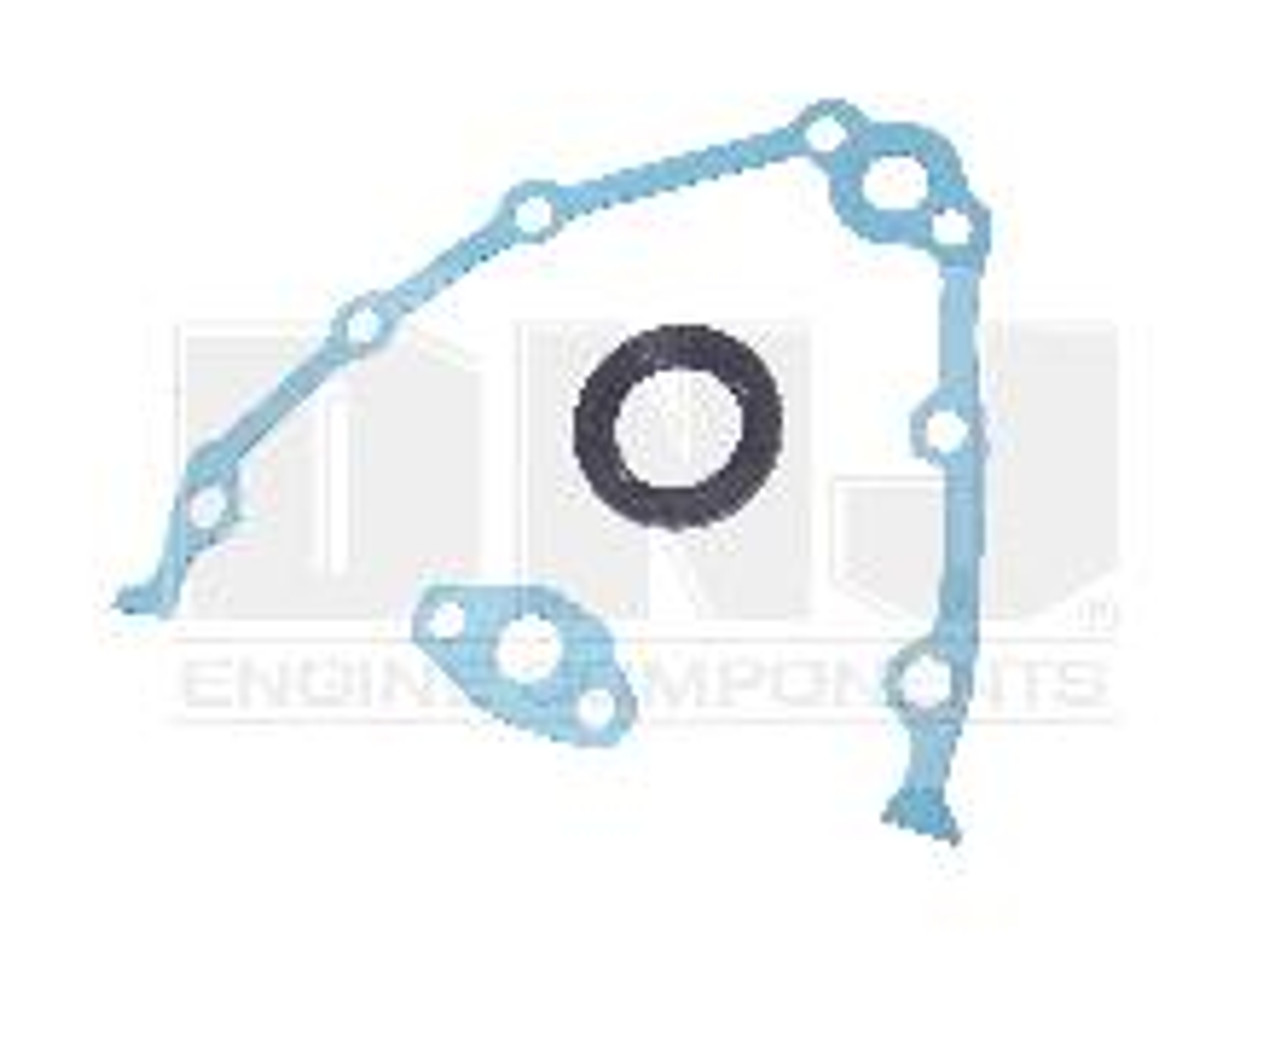 1989 Hyundai Excel 1.5L Engine Timing Cover Seal TC100A -22